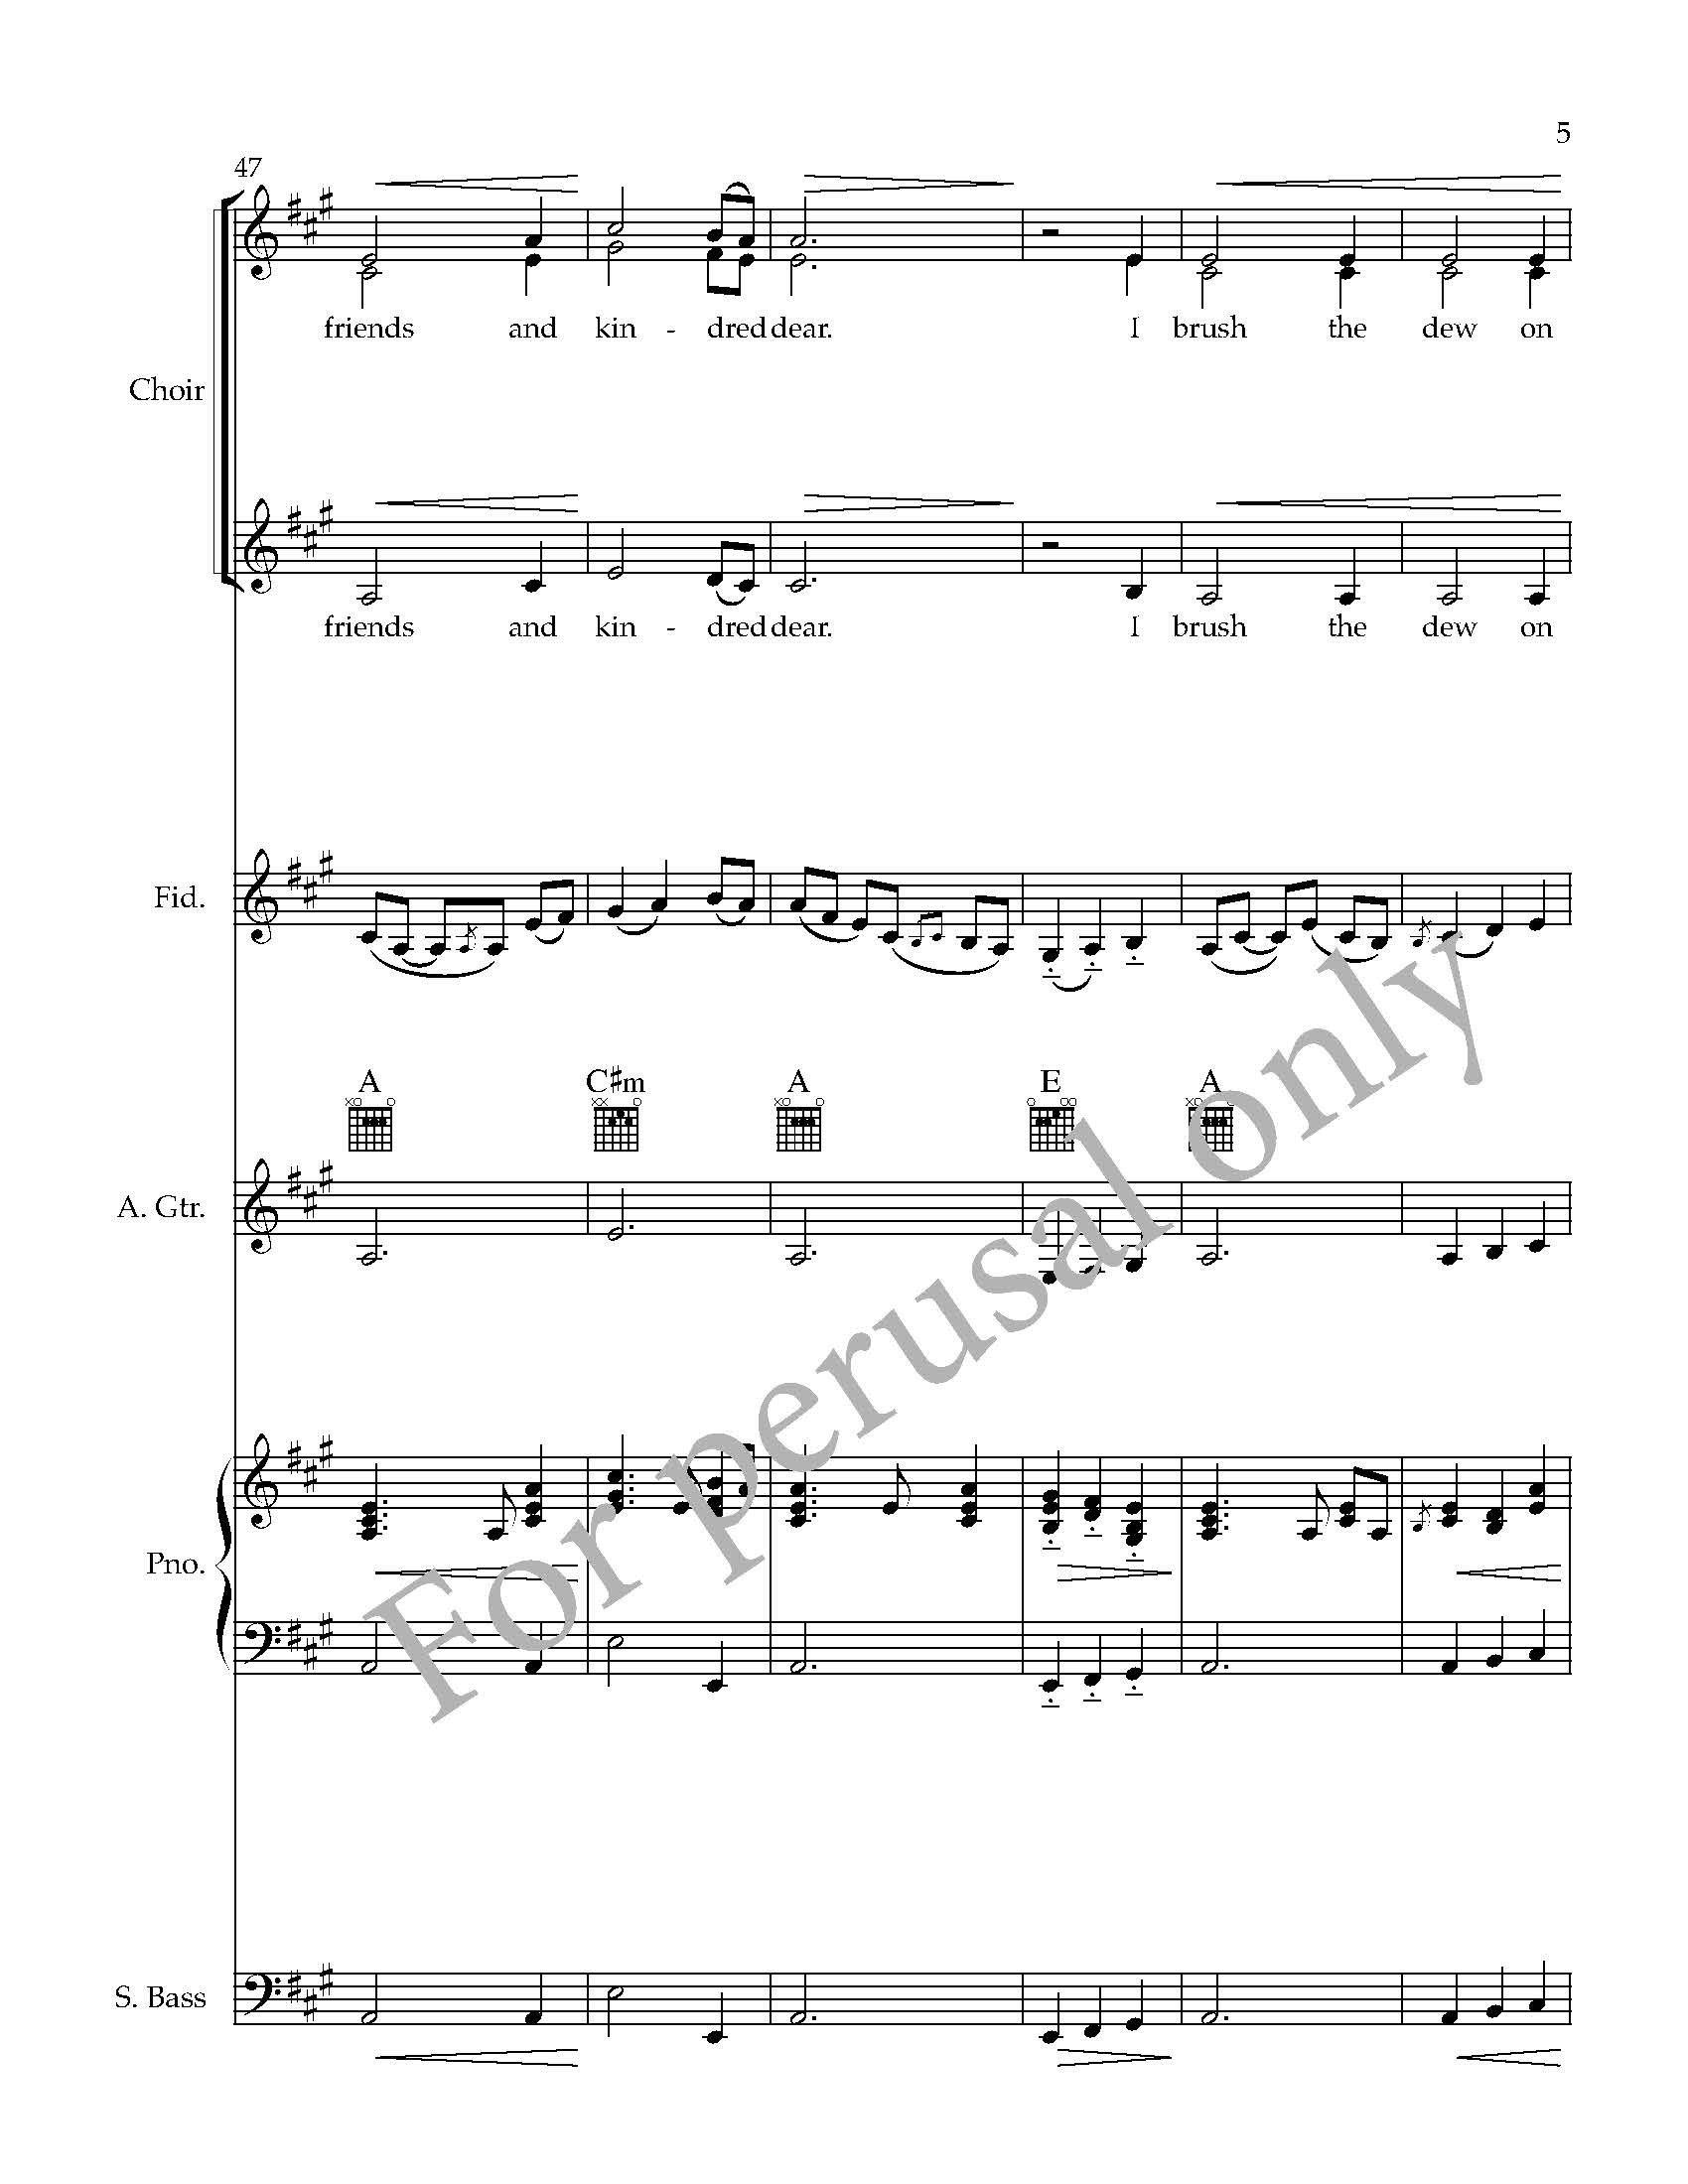 FULL SCORE preview - Angel Band for three-part choir, fiddle, piano, guitar, and bass - arr_Page_05.jpg